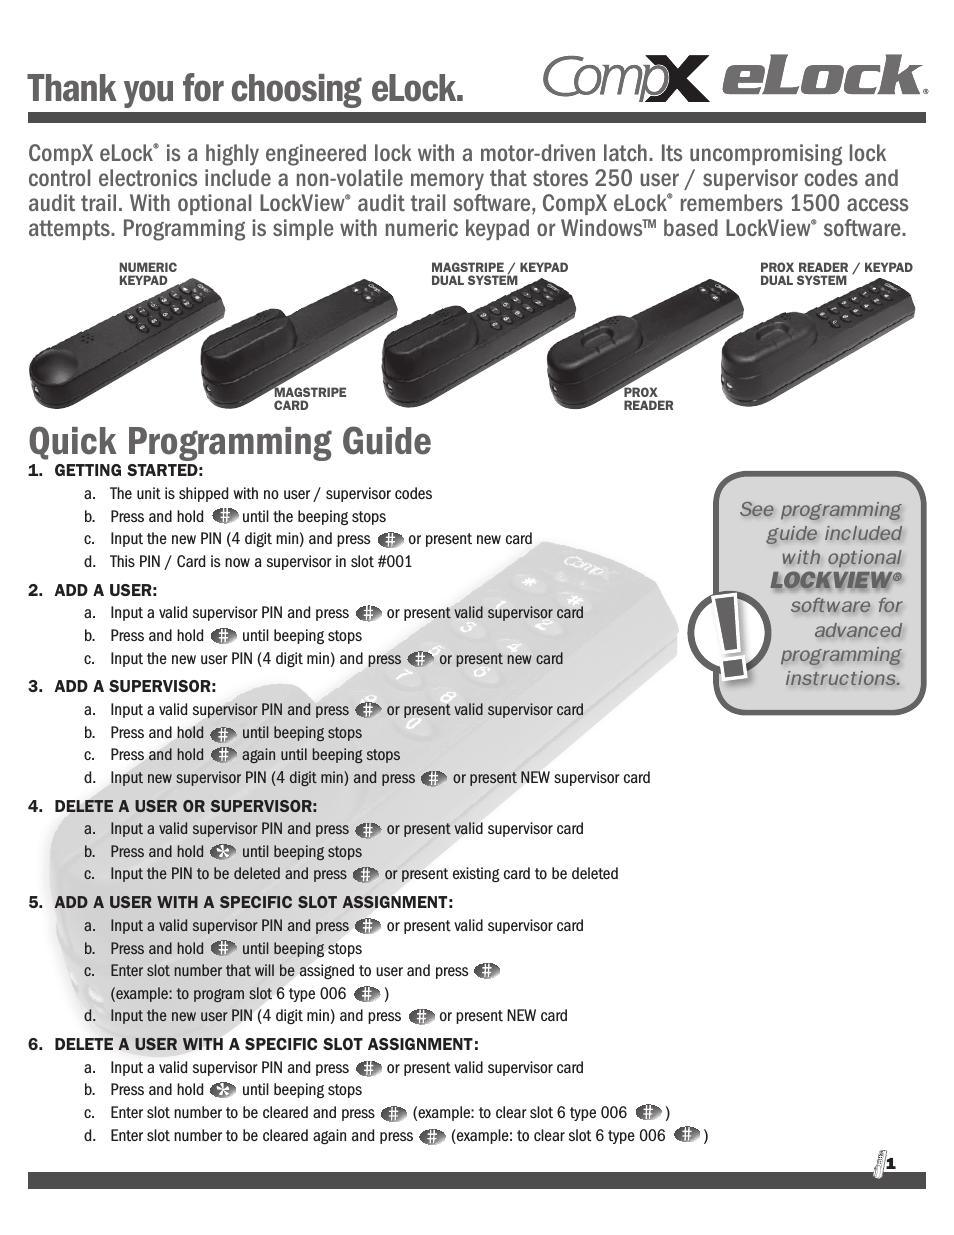 Magstripe / Keypad Dual System Quick Programming Guide